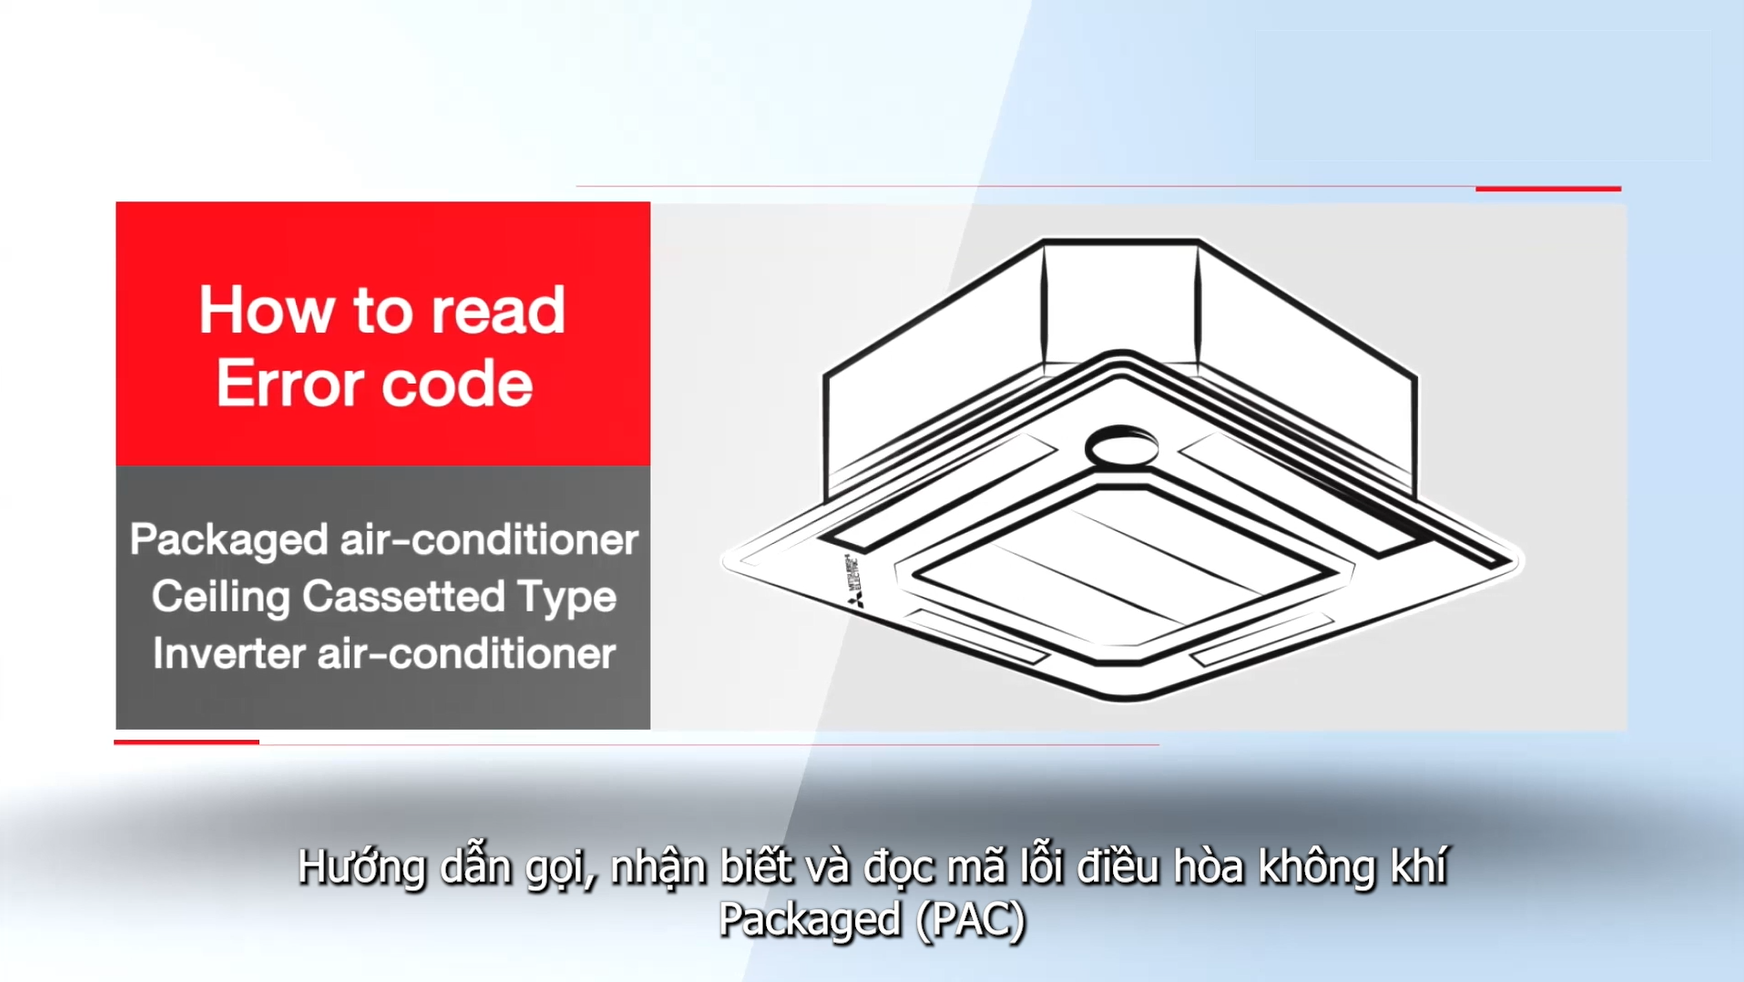 [Technician Support] EP 2 - How to read the Error Code of ceiling cassette type 4-way airflow type 